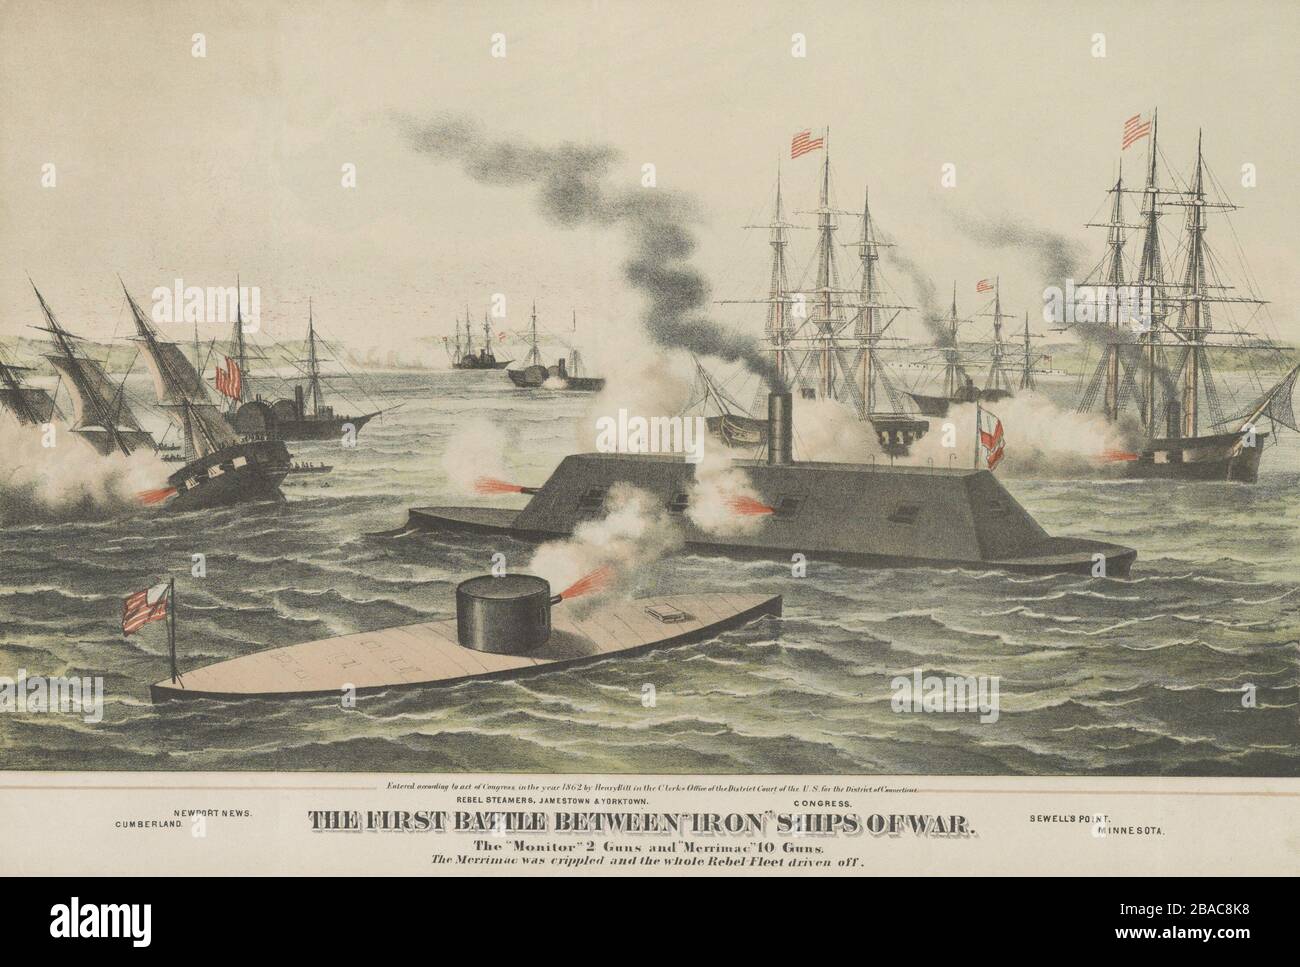 US Civil War, Battle of Hampton Roads, on March 9, 1862, the first engagement between ironclad gunboats. USS Monitor and CSS Virginia (formerly the USS Merrimac) are engaged in combat, with other ships nearby. At left is the USS Cumberland, sinking, an event that took place on March 8th, the day previous to the ironclad battle at center. The USS Minnesota at far right, was engaged in the ironclad battle of March 9th  (BSLOC_2018_8_19) Stock Photo